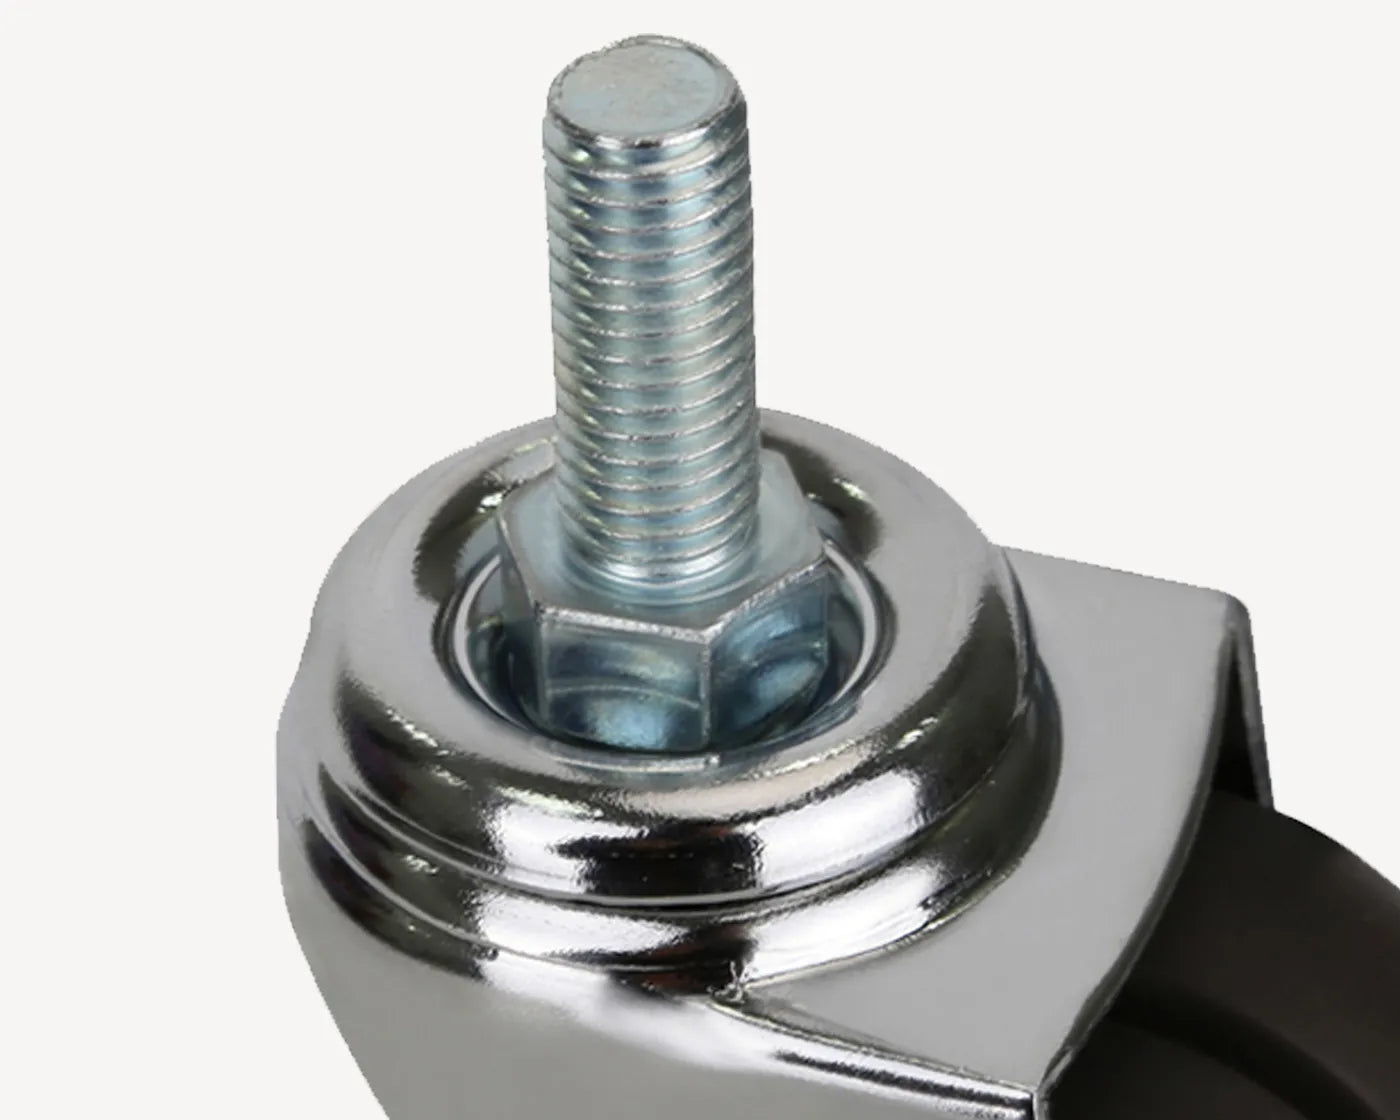 Top view of a caster wheel's attachment point, featuring a shiny metal housing and threaded stem for secure mounting.